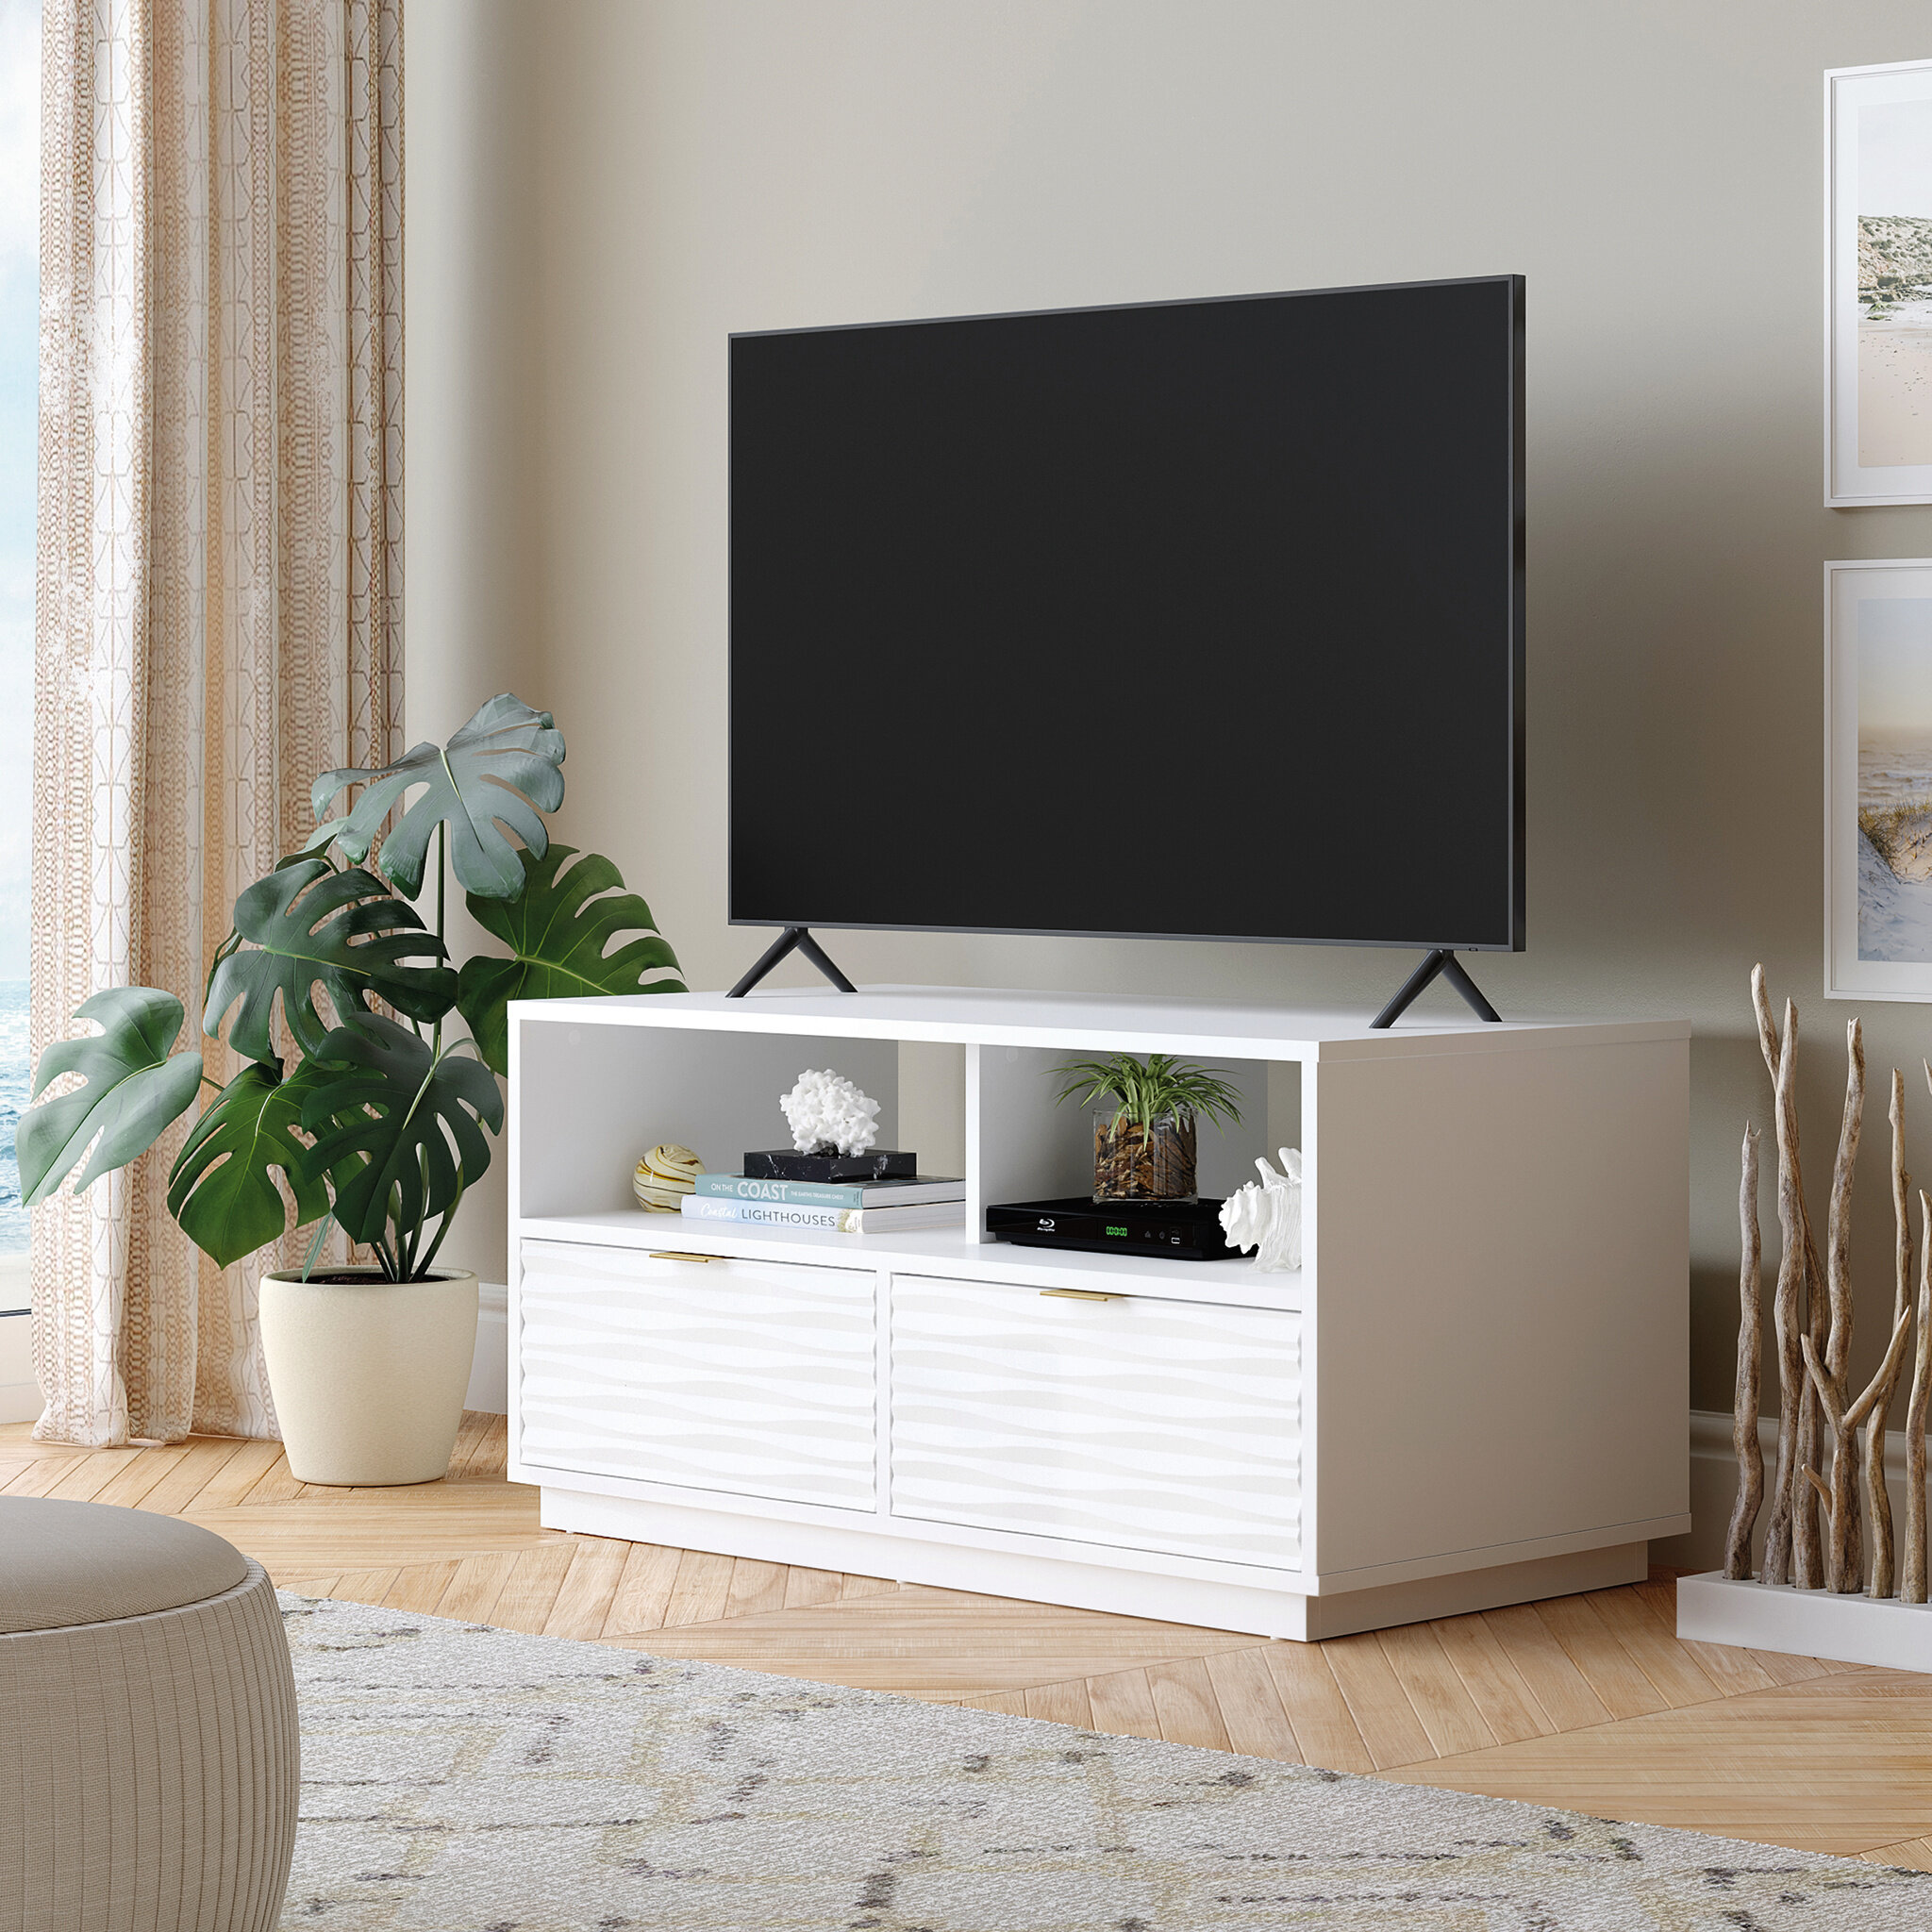 Etta Avenue™ Marcelo Tv Stand For Tvs Up To 43 And Reviews Wayfair